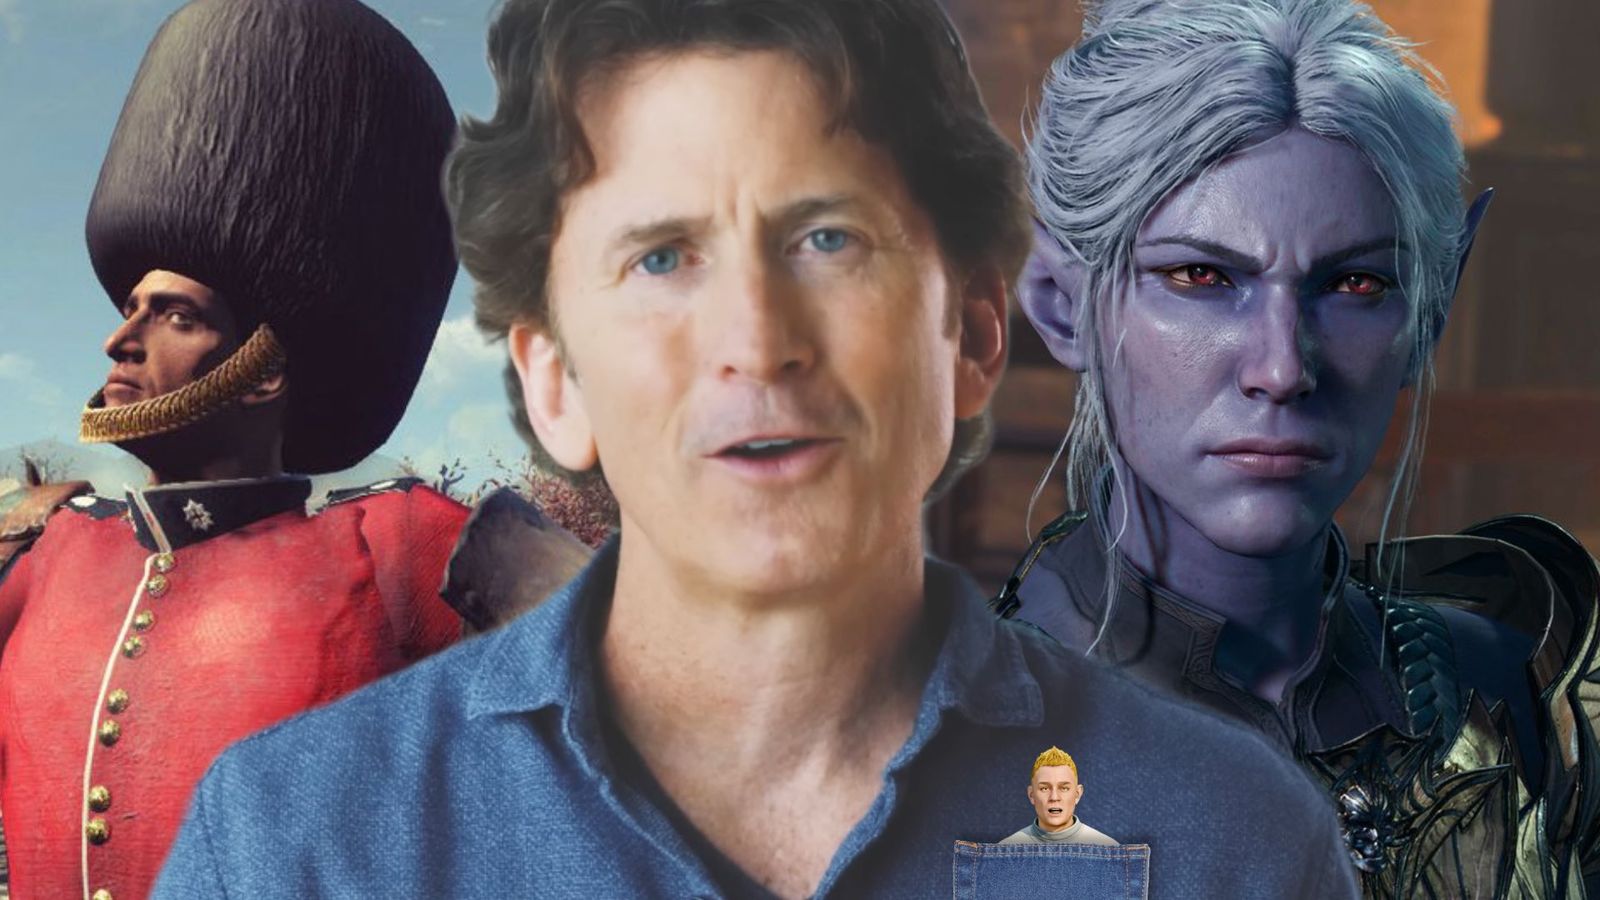 Starfield hype is already causing other devs to change their plans - Starfield creative director Todd Howard with an adoring fan in his pocket atop a background split in two. On the left, a Queen’s Guard from Fallout London poses; on the right, a character from Baldur’s Gate scowls 